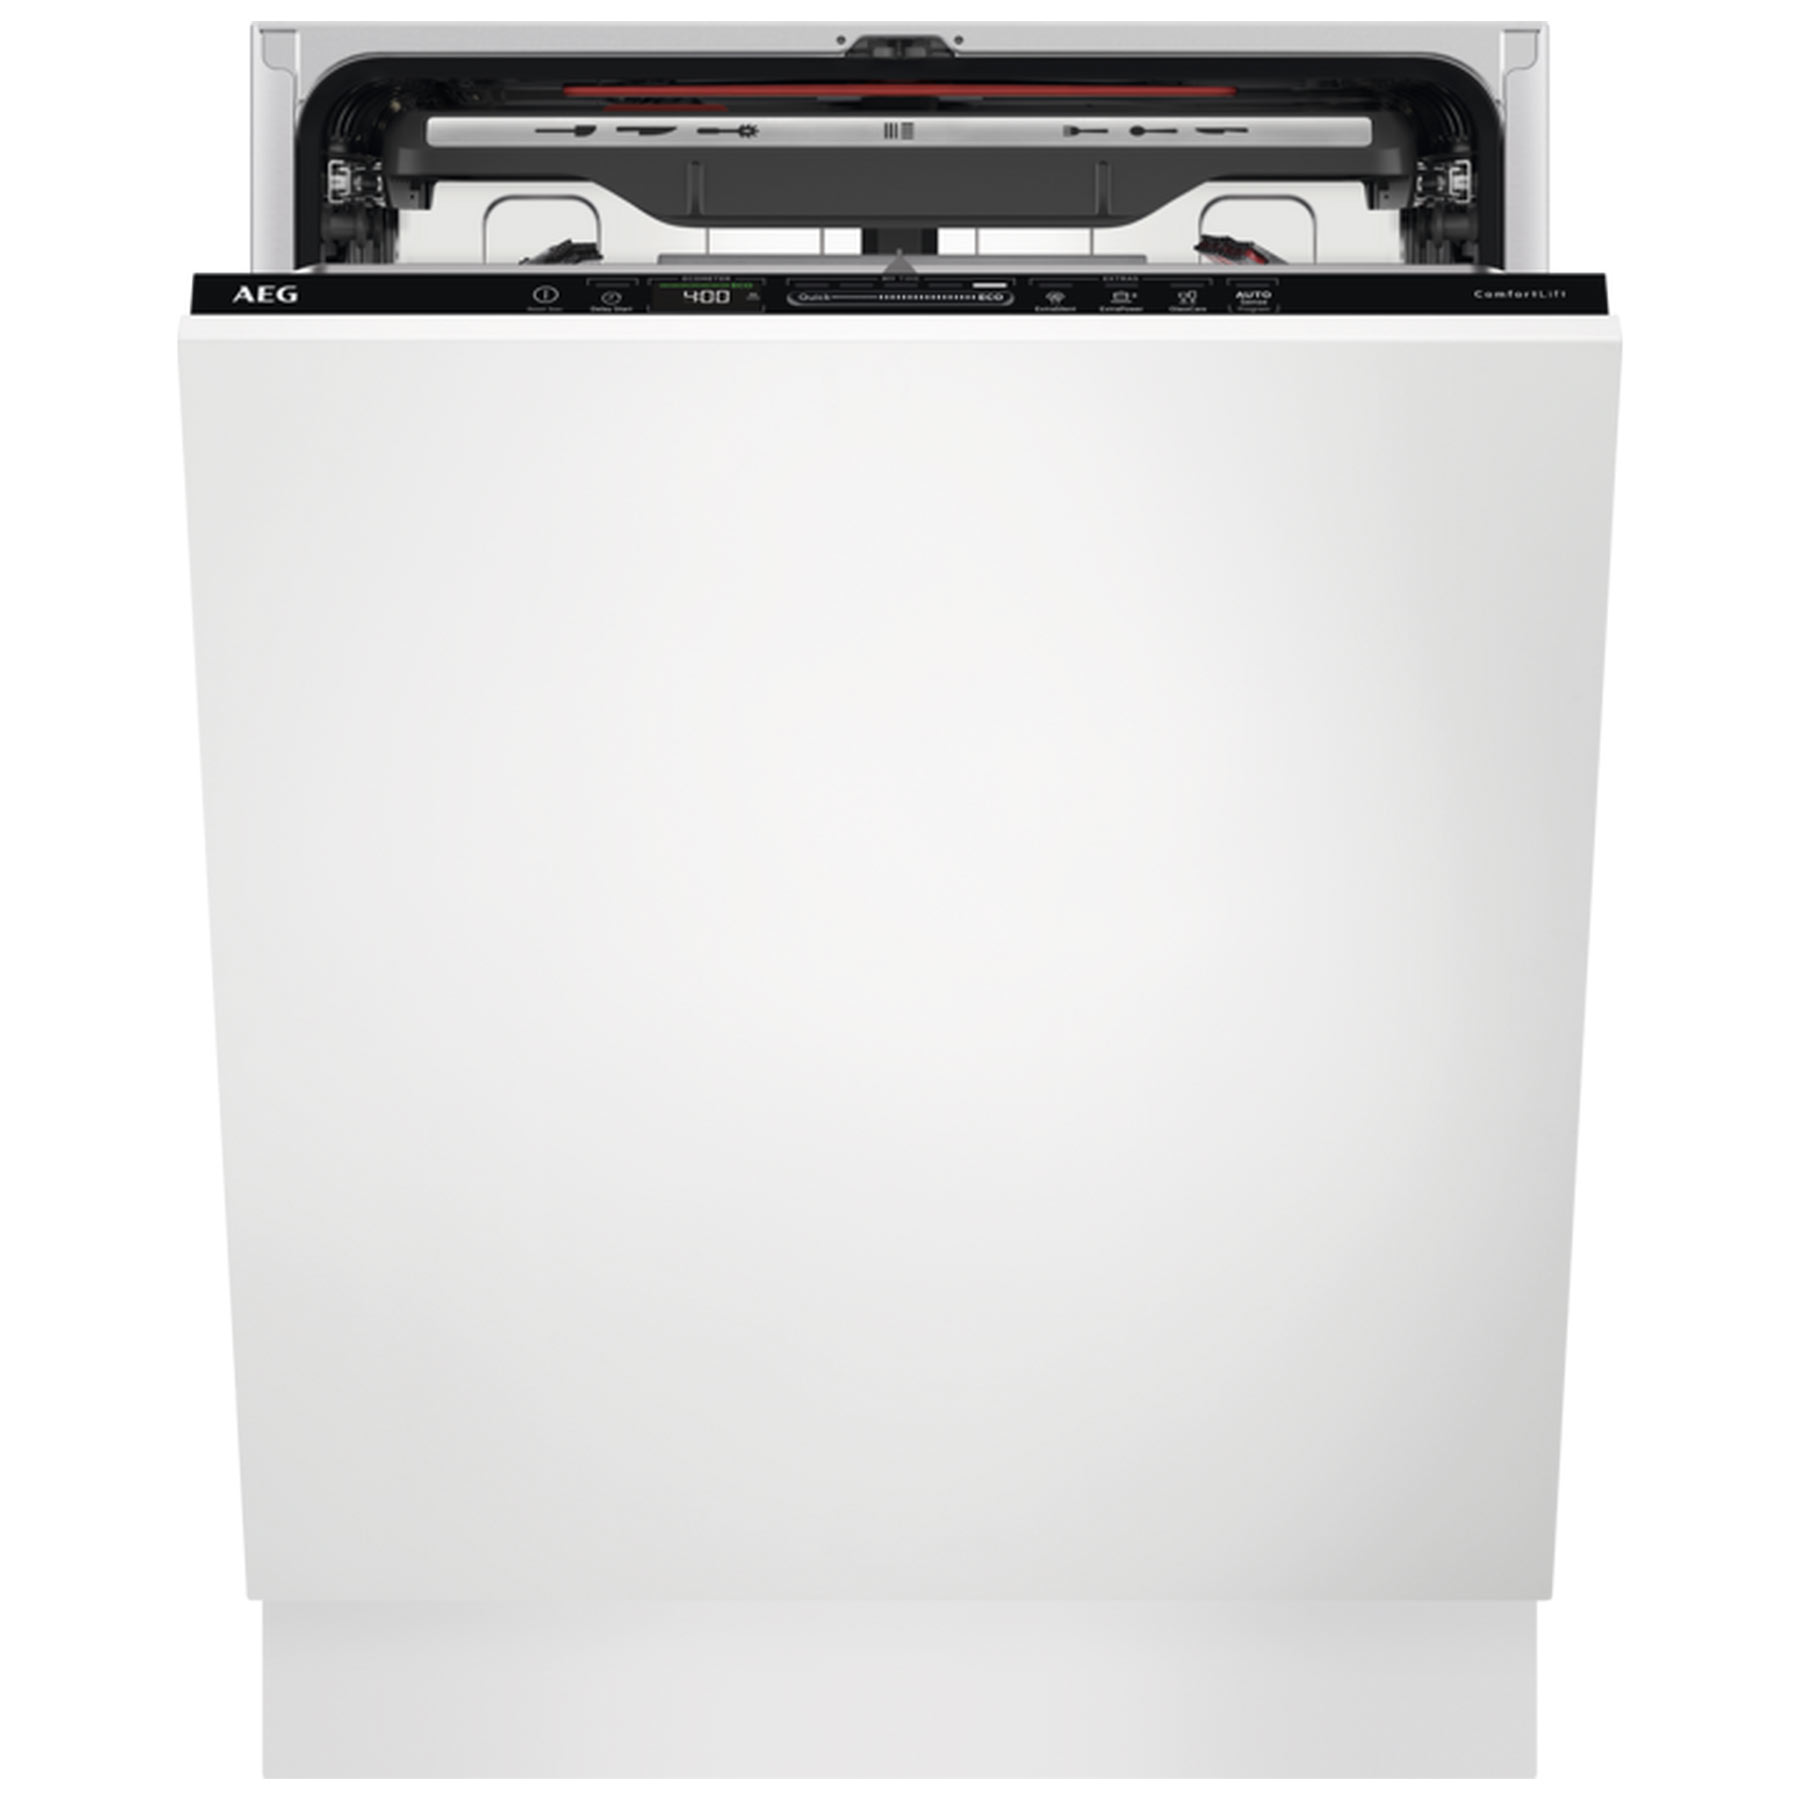 Image of AEG FSE83837P 60cm Dishwasher in White 14 Place Settings D Rated